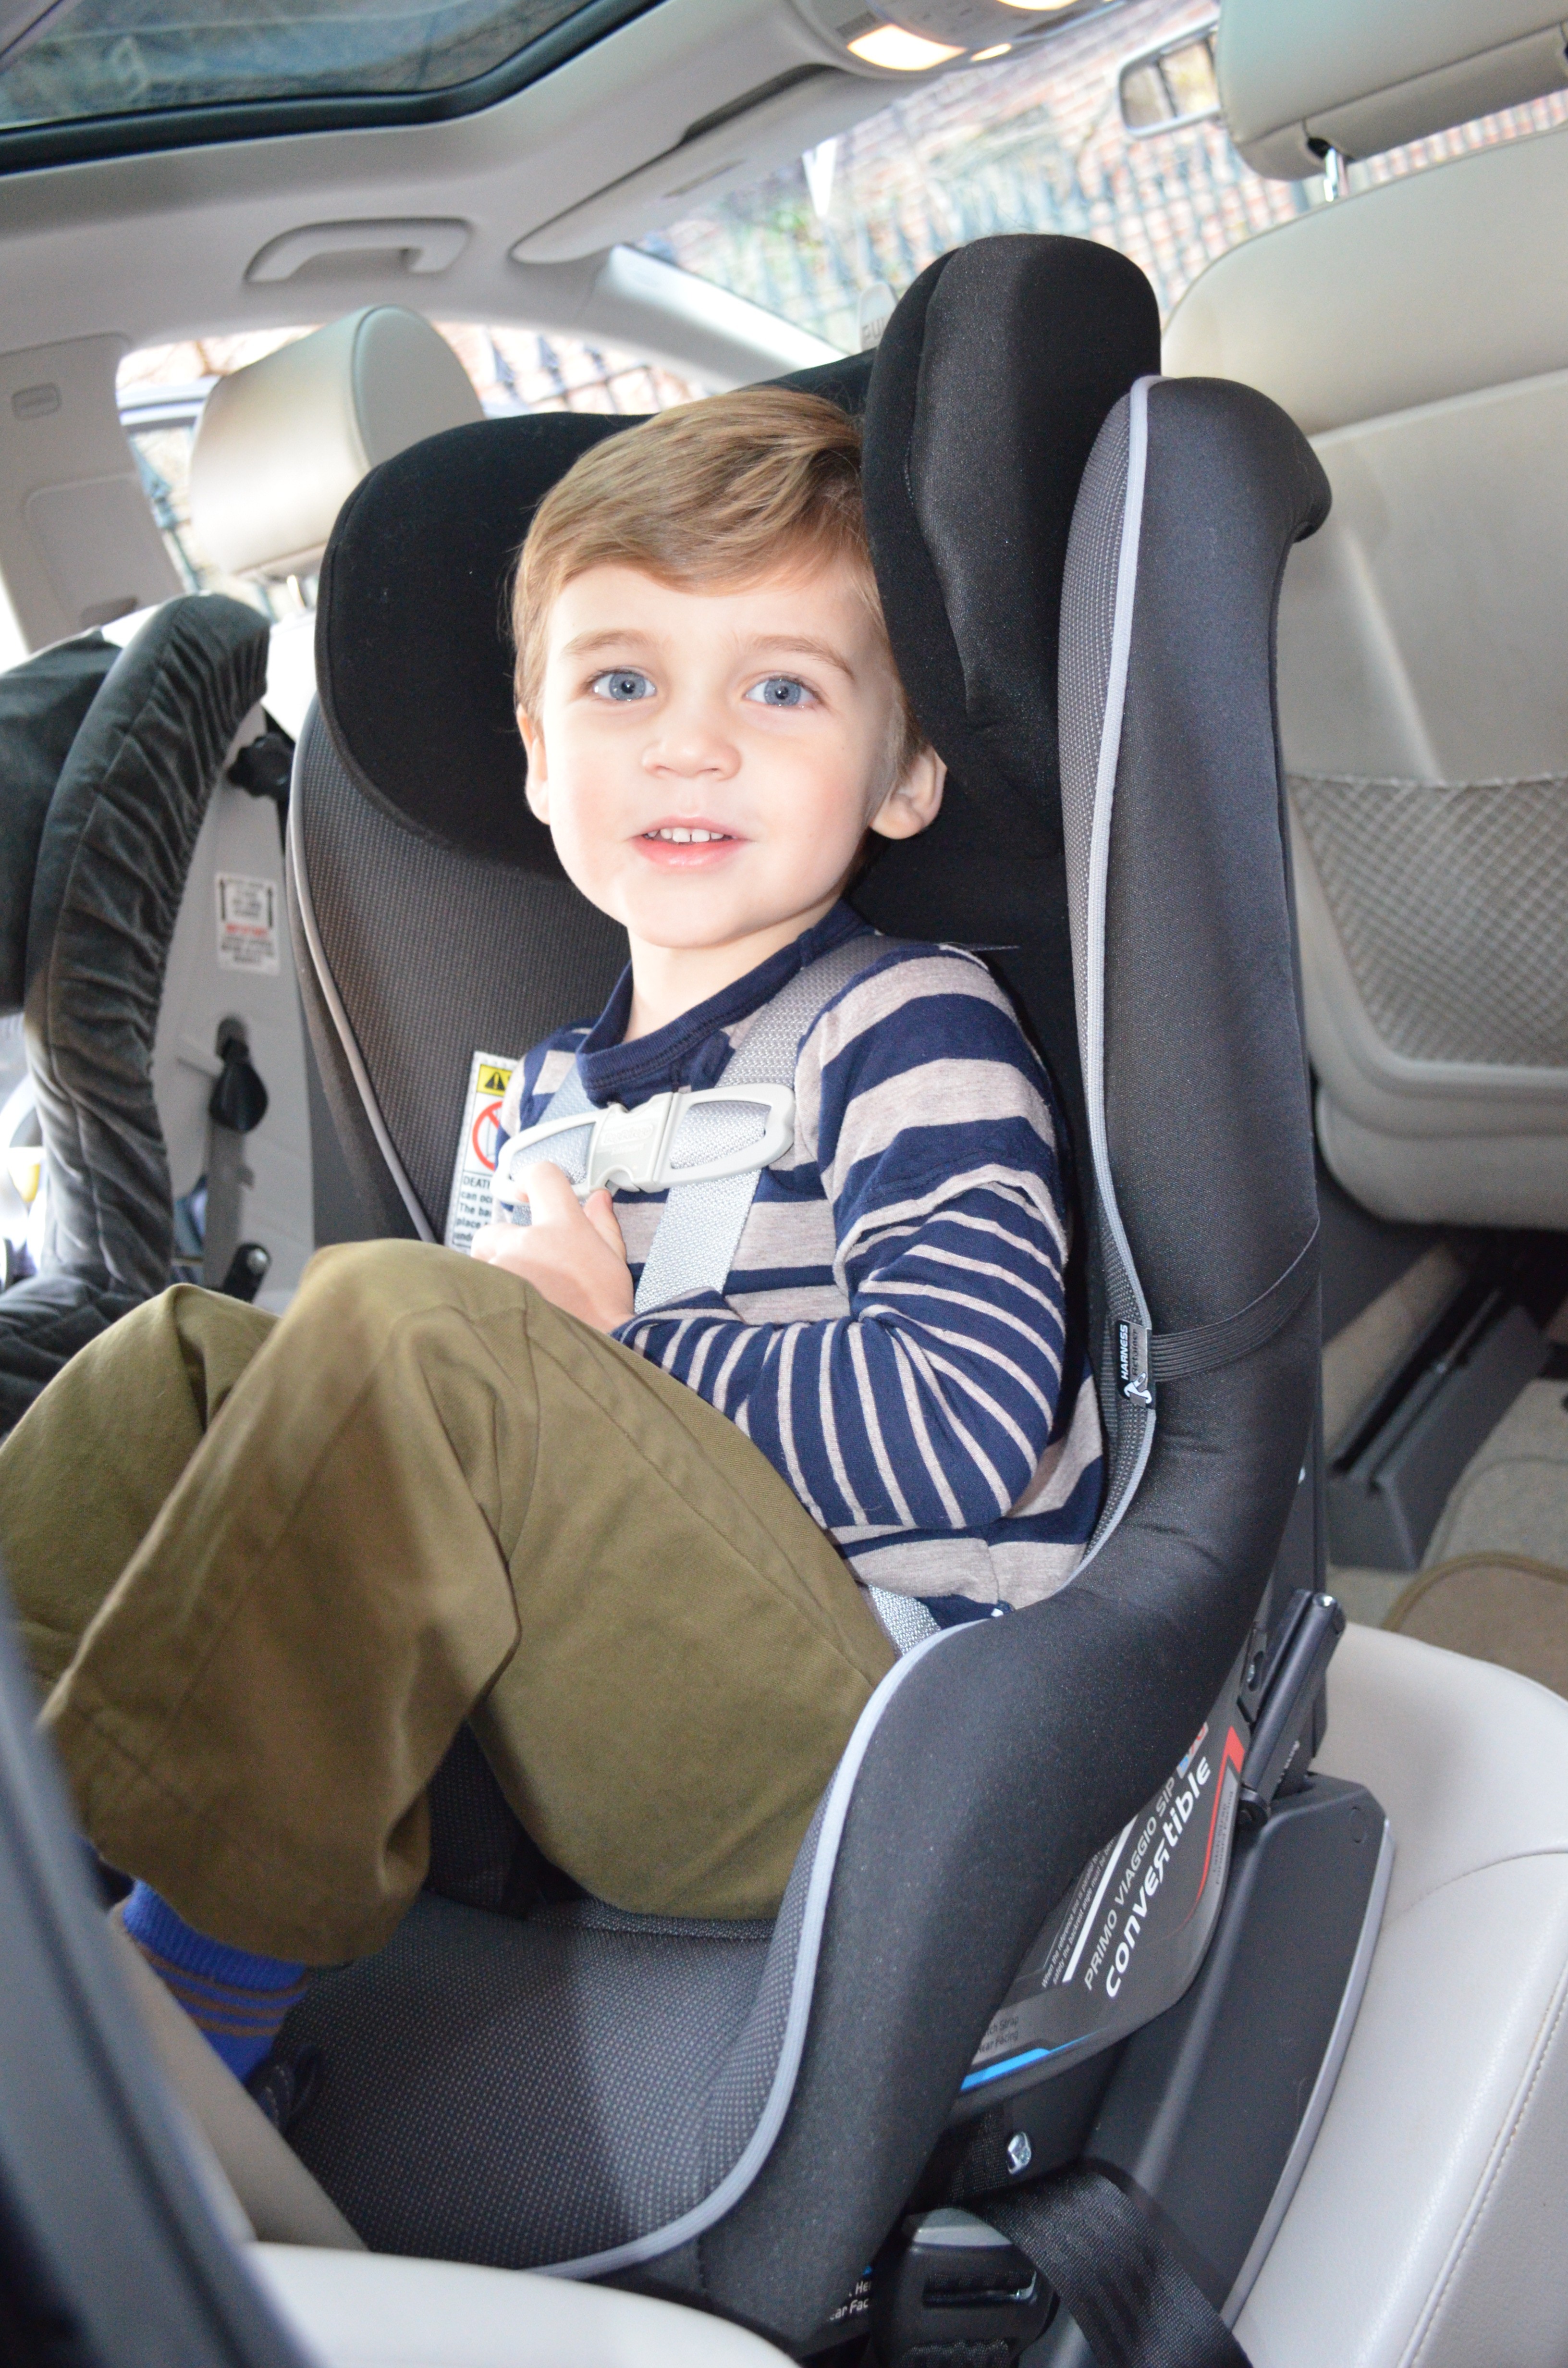 Your Child Turn Forward Facing, At What Weight Can A Child Be In Front Facing Car Seat